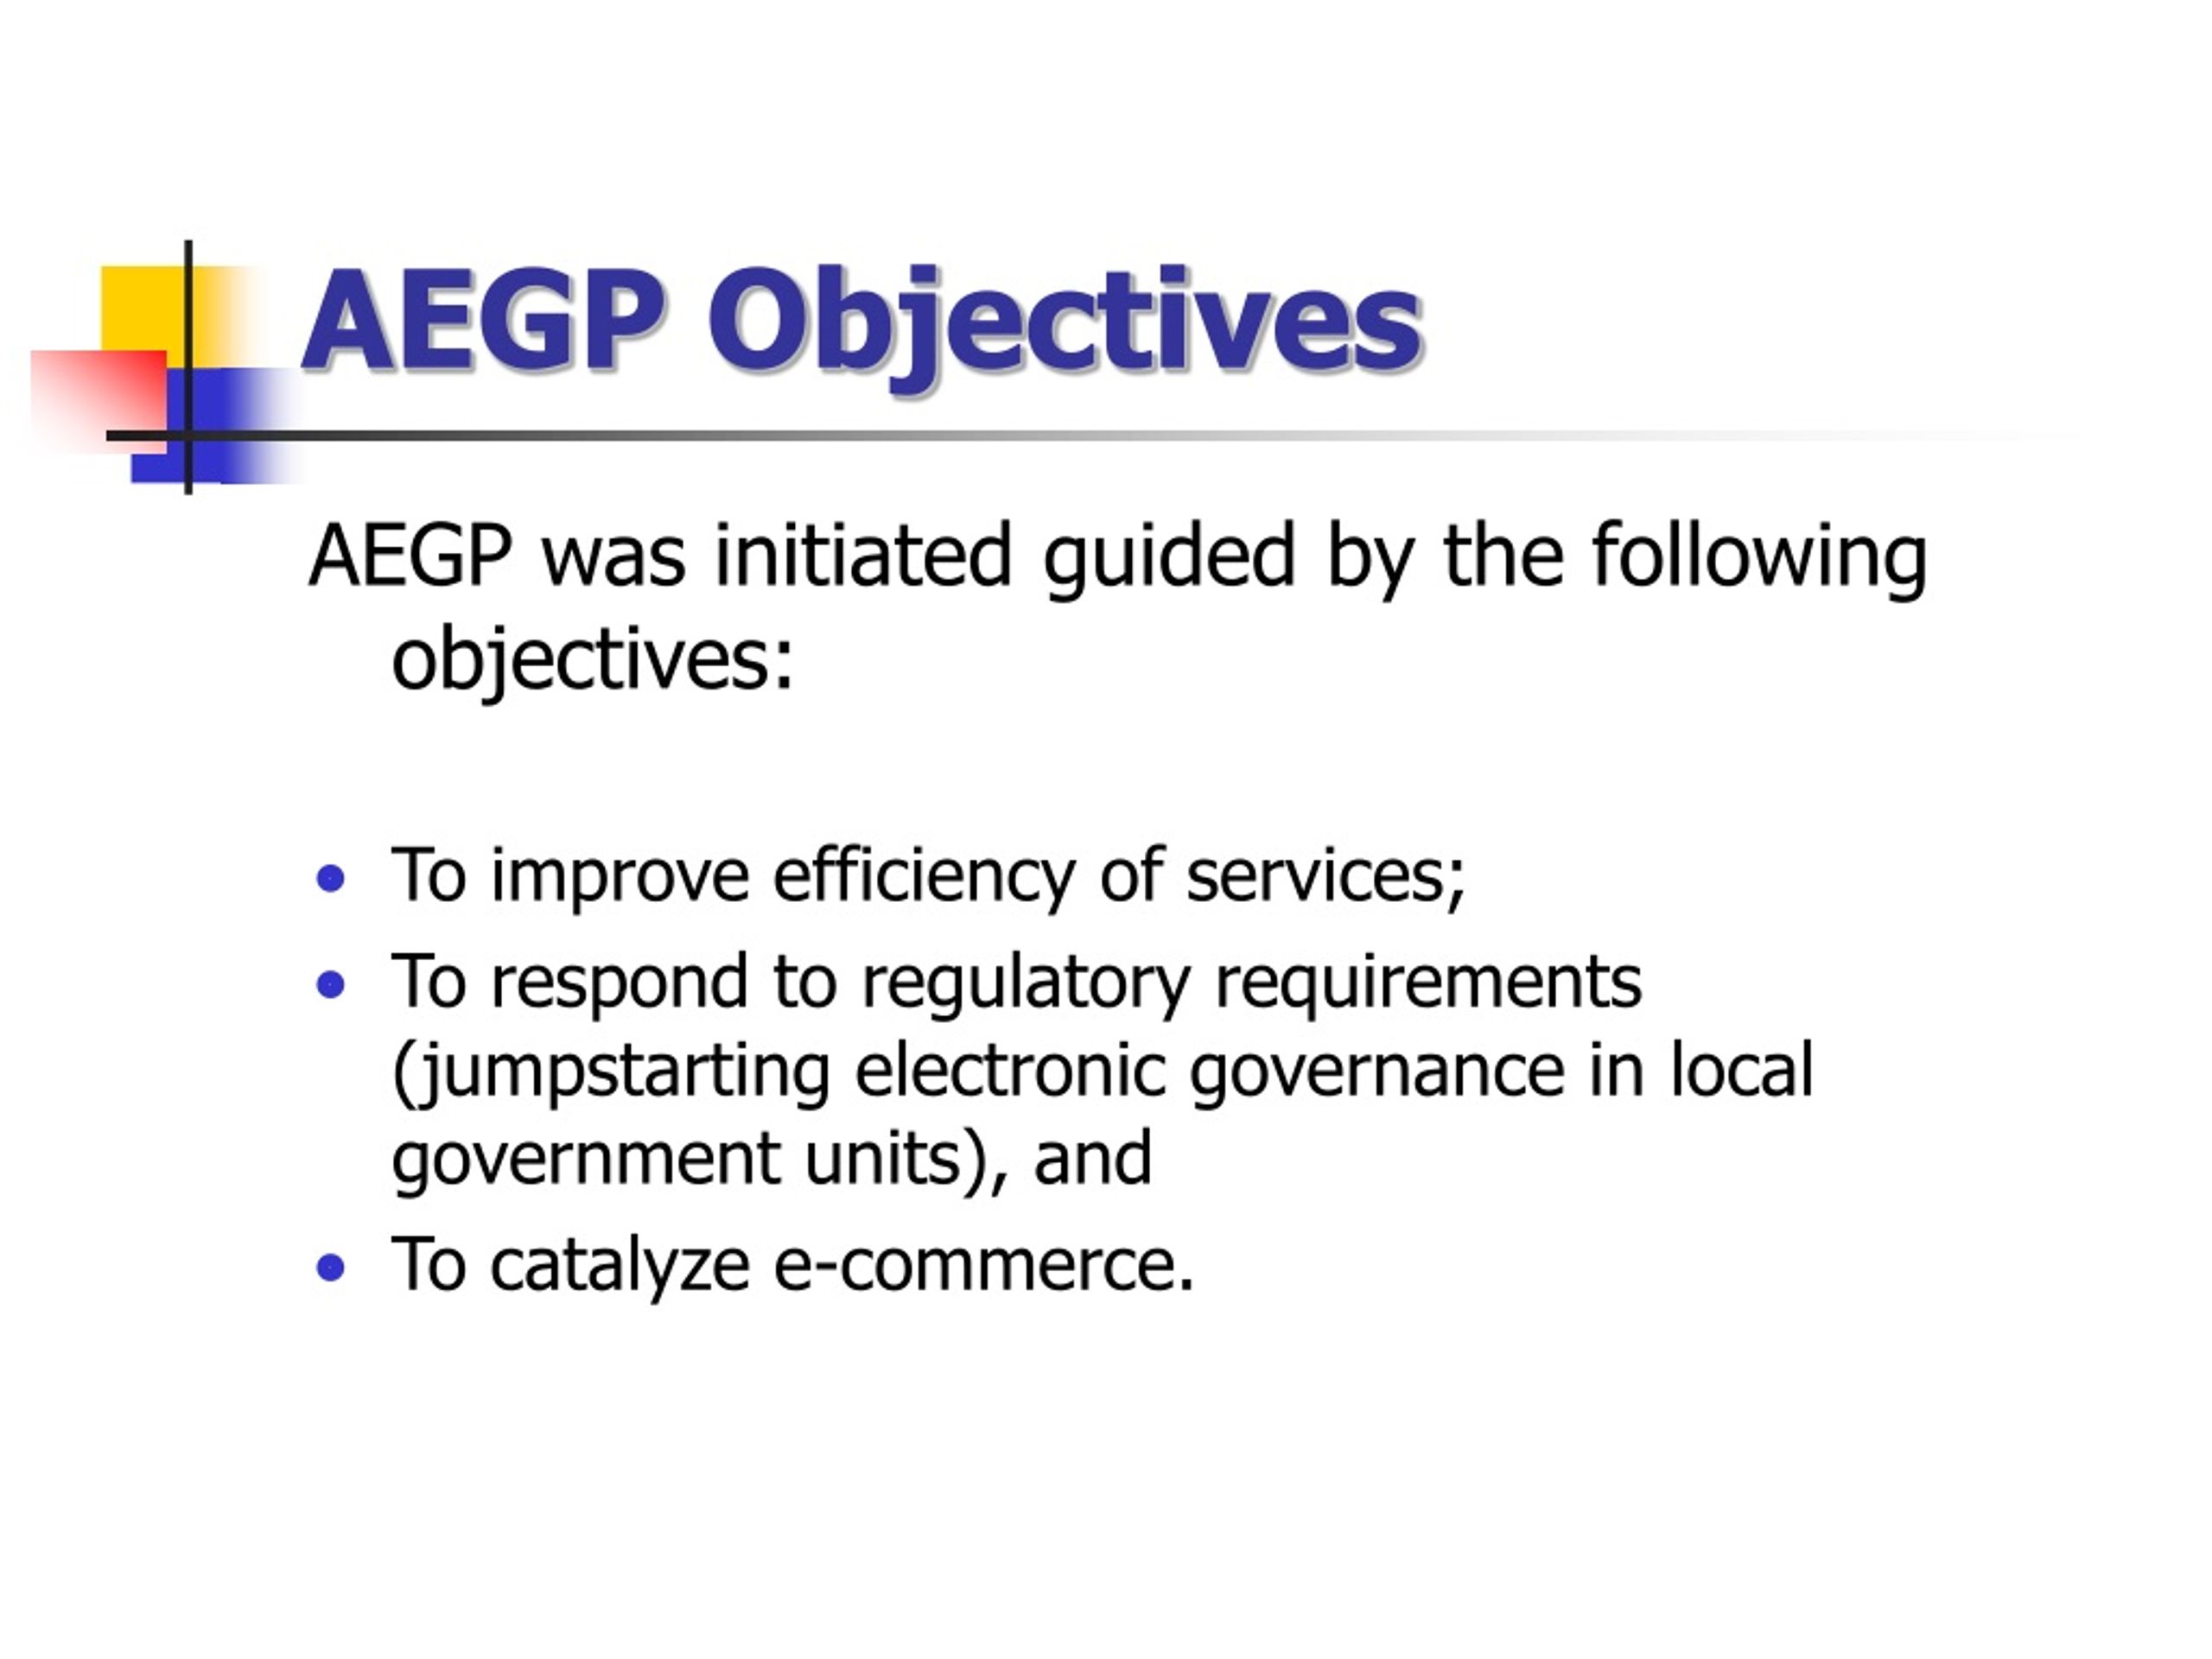 aegp aedynamiclinkserver download